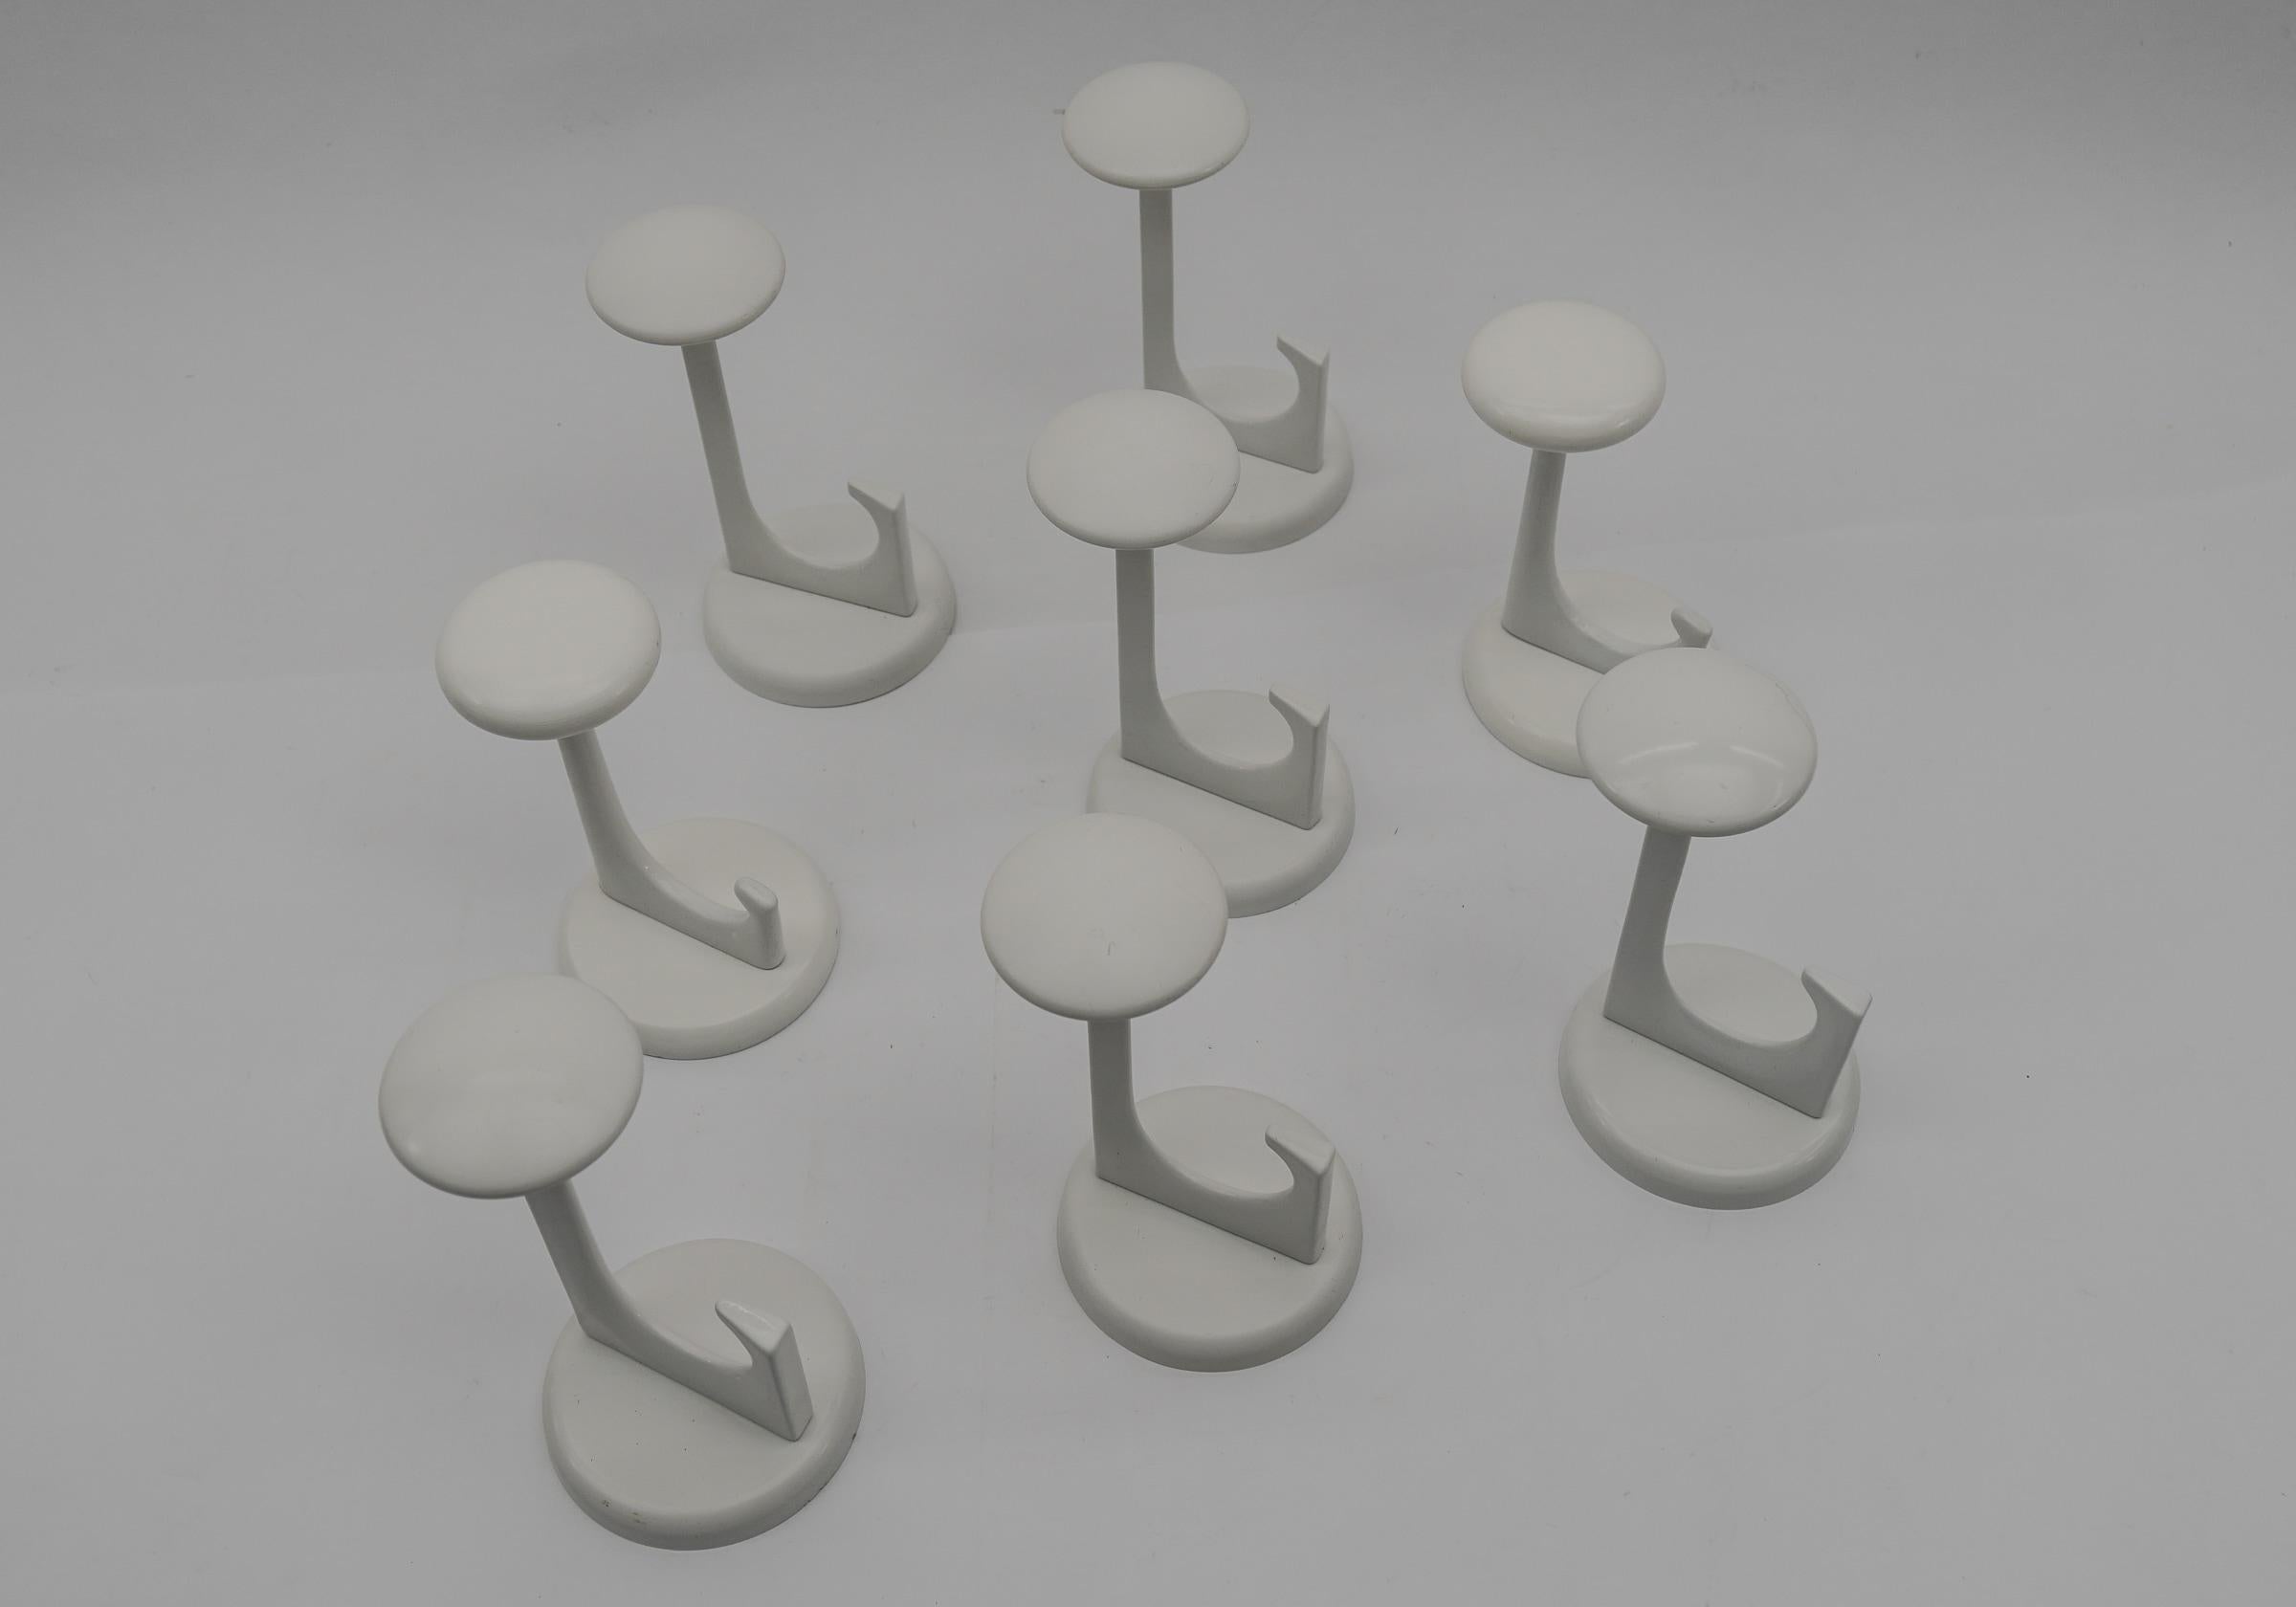 Mid-20th Century Set of 8 Mid-Century Modern Wall Hooks by Schönbuch, Germany, 1960s For Sale